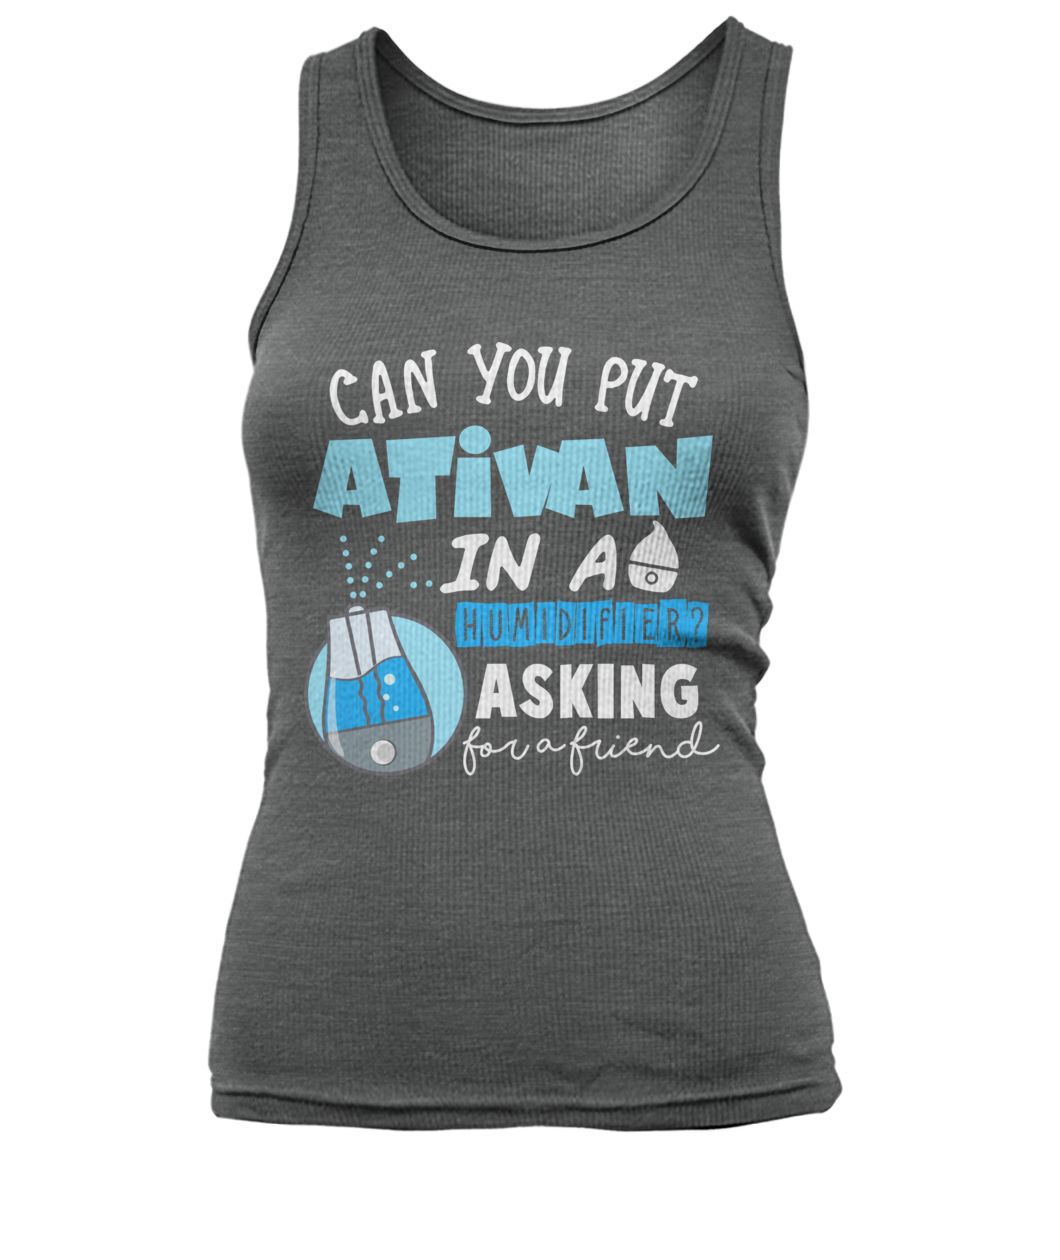 Can you put ativan in a humidifier asking for a friend women's tank top